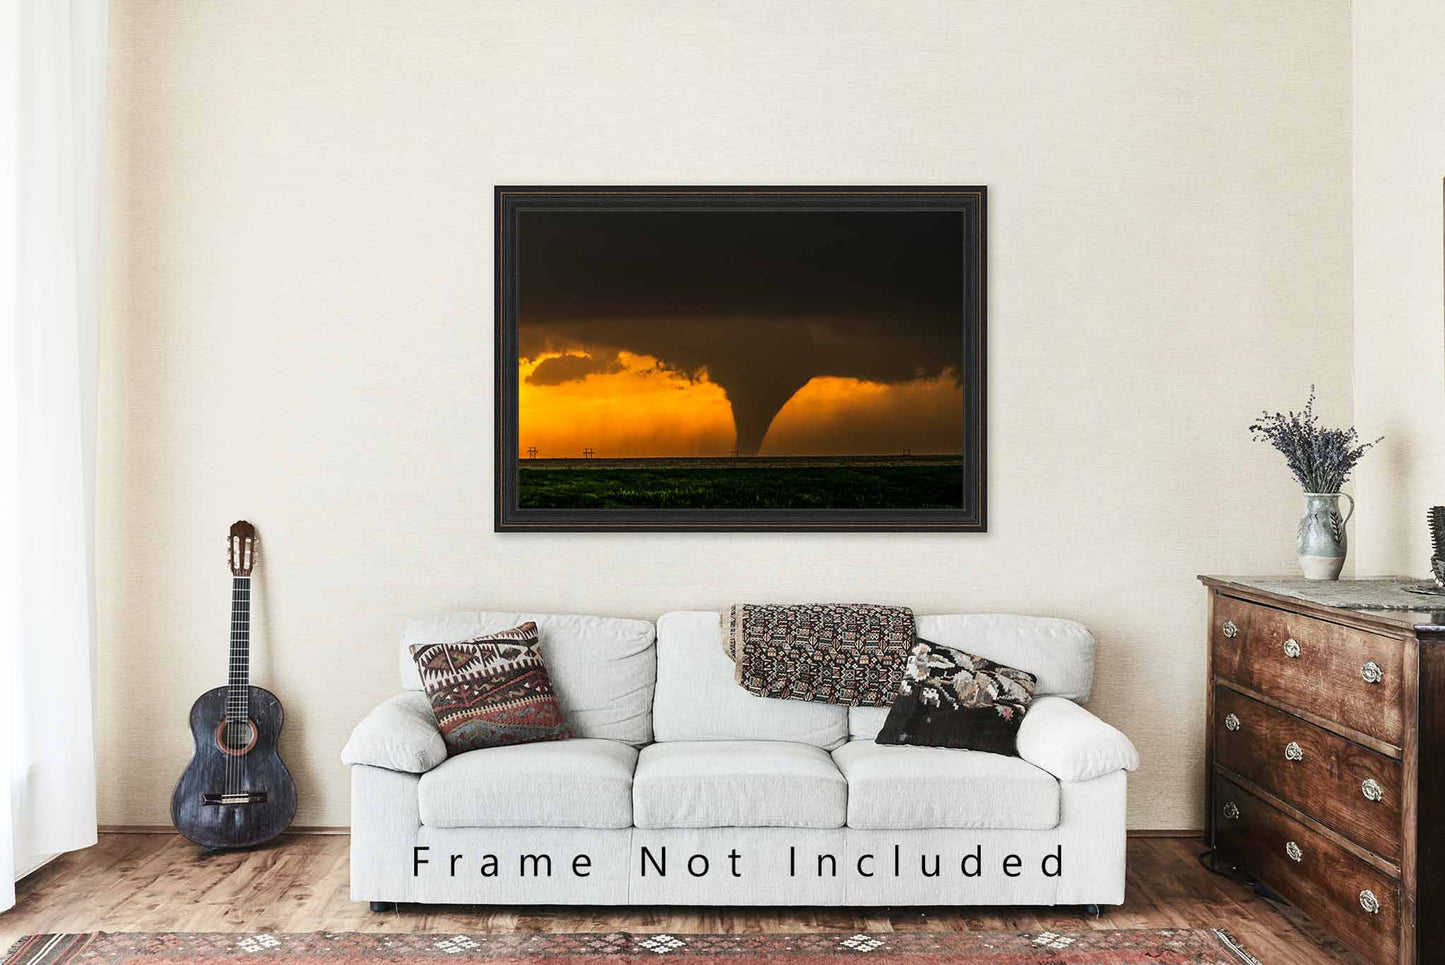 Tornado Picture - Kansas Photography Print of Large Twister at Sunset on Stormy Evening Weather Landscape Storm Wall Art Photo Decor